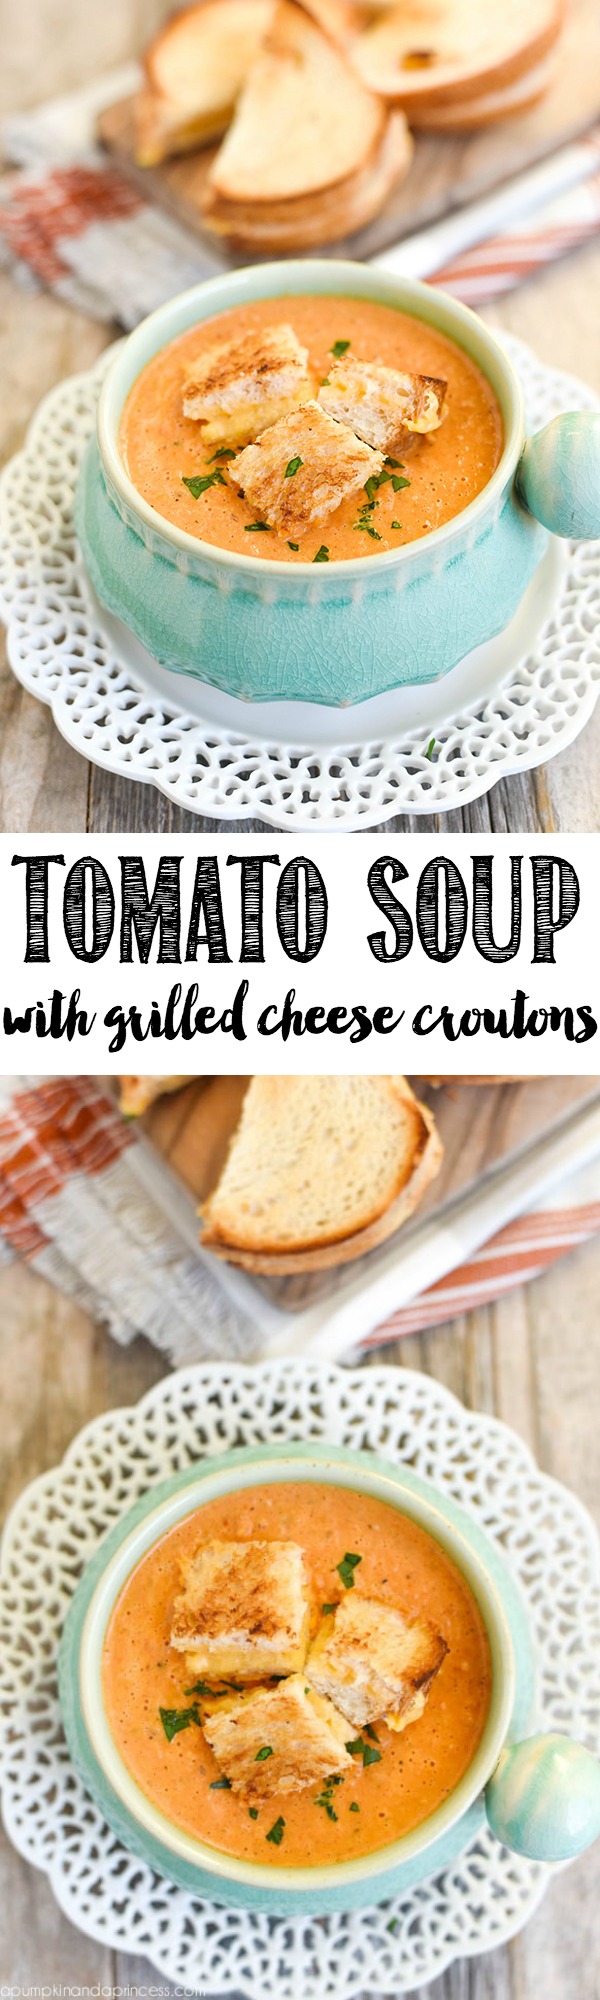 Roasted Tomato Soup with grilled cheese croutons